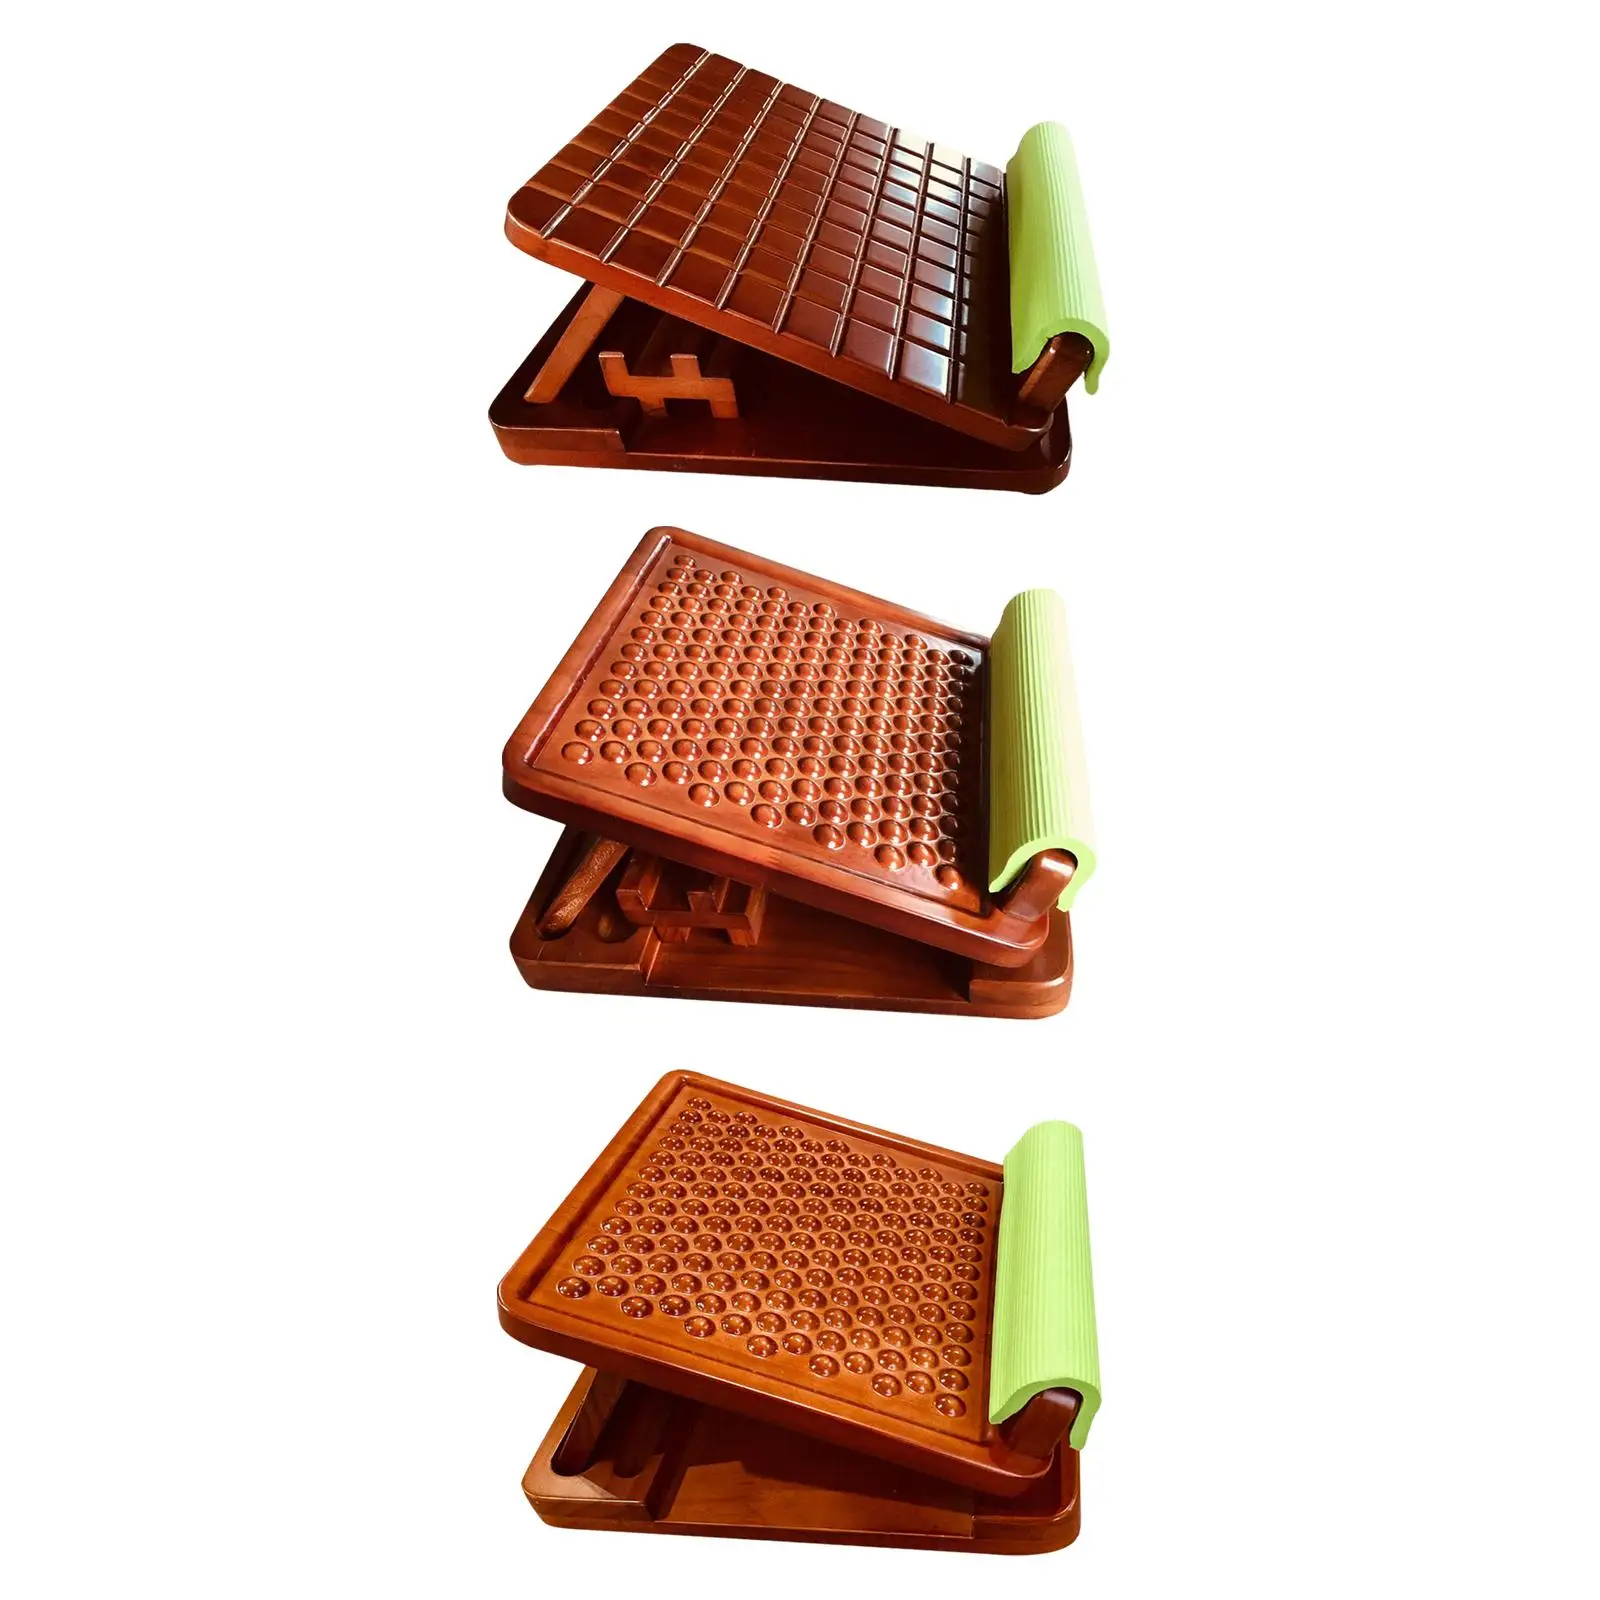 Solid Wood Slant Board for Ankle Exercise Stretching Calves Training Equipment